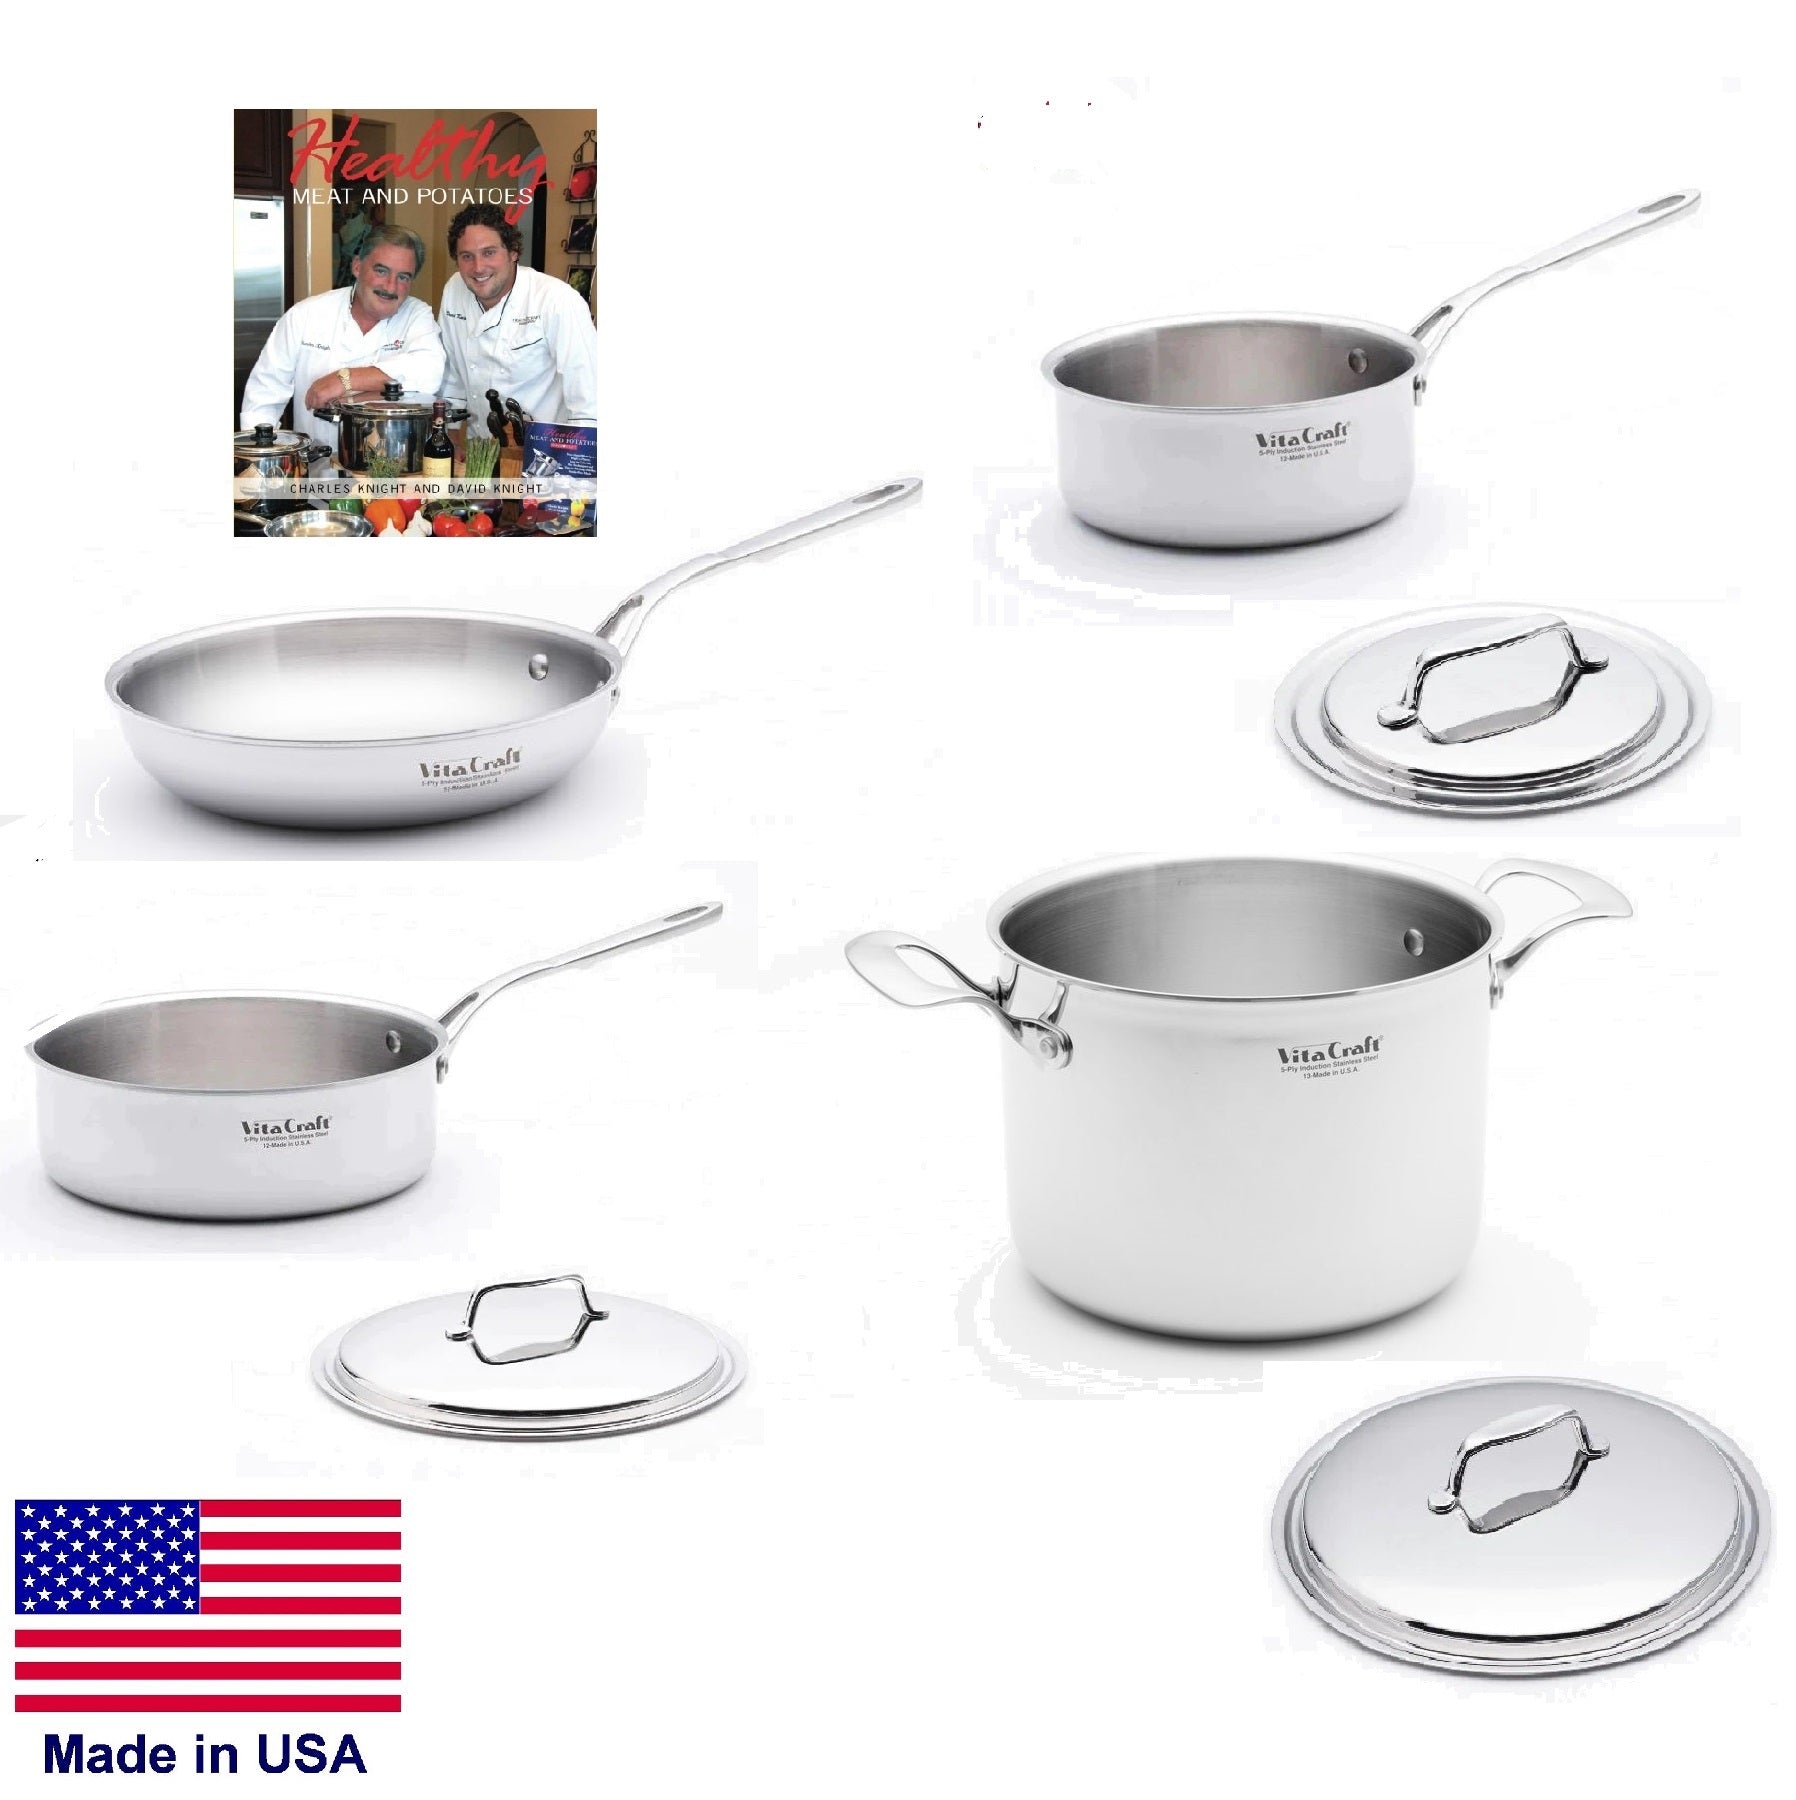 Cookware set 5 pieces Profesional with glass lid. - BRA